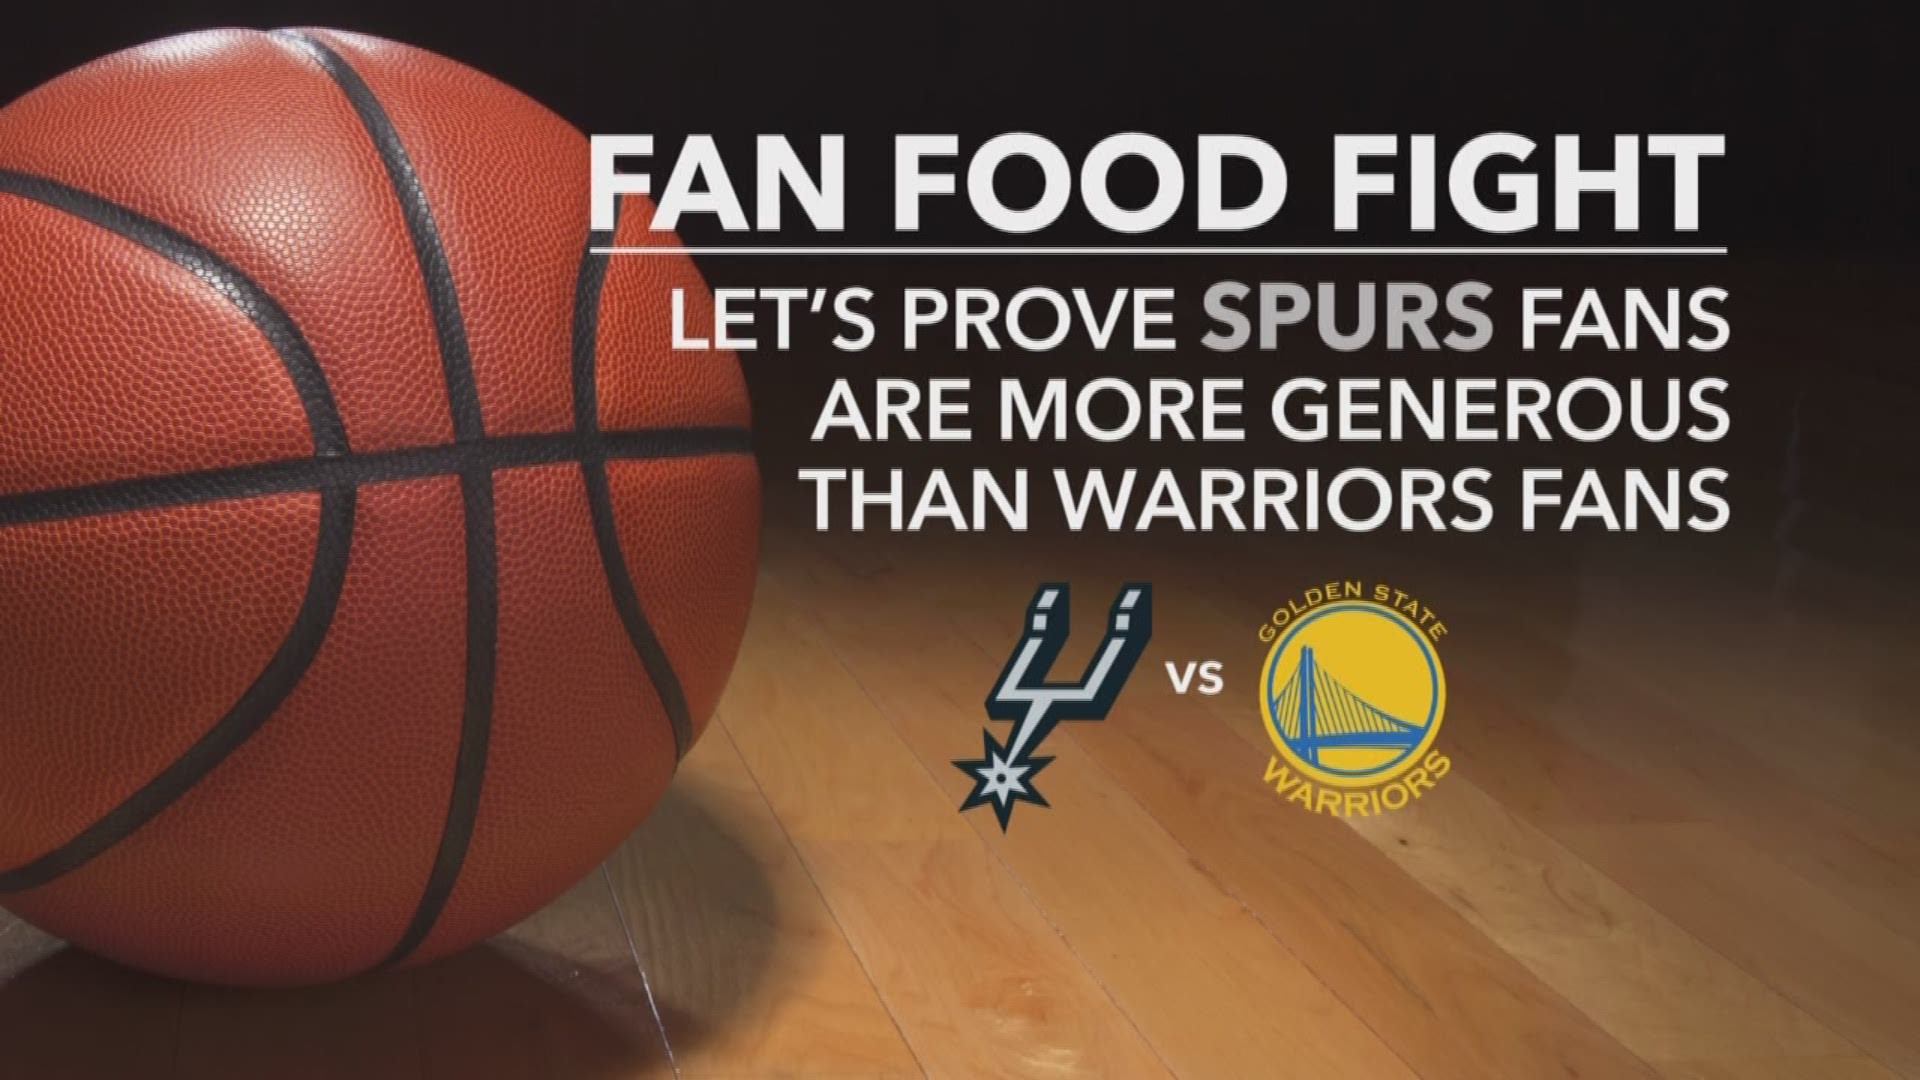 The Spurs may be in a fight to win it against the Warriors on the court but there is another face-off taking place.